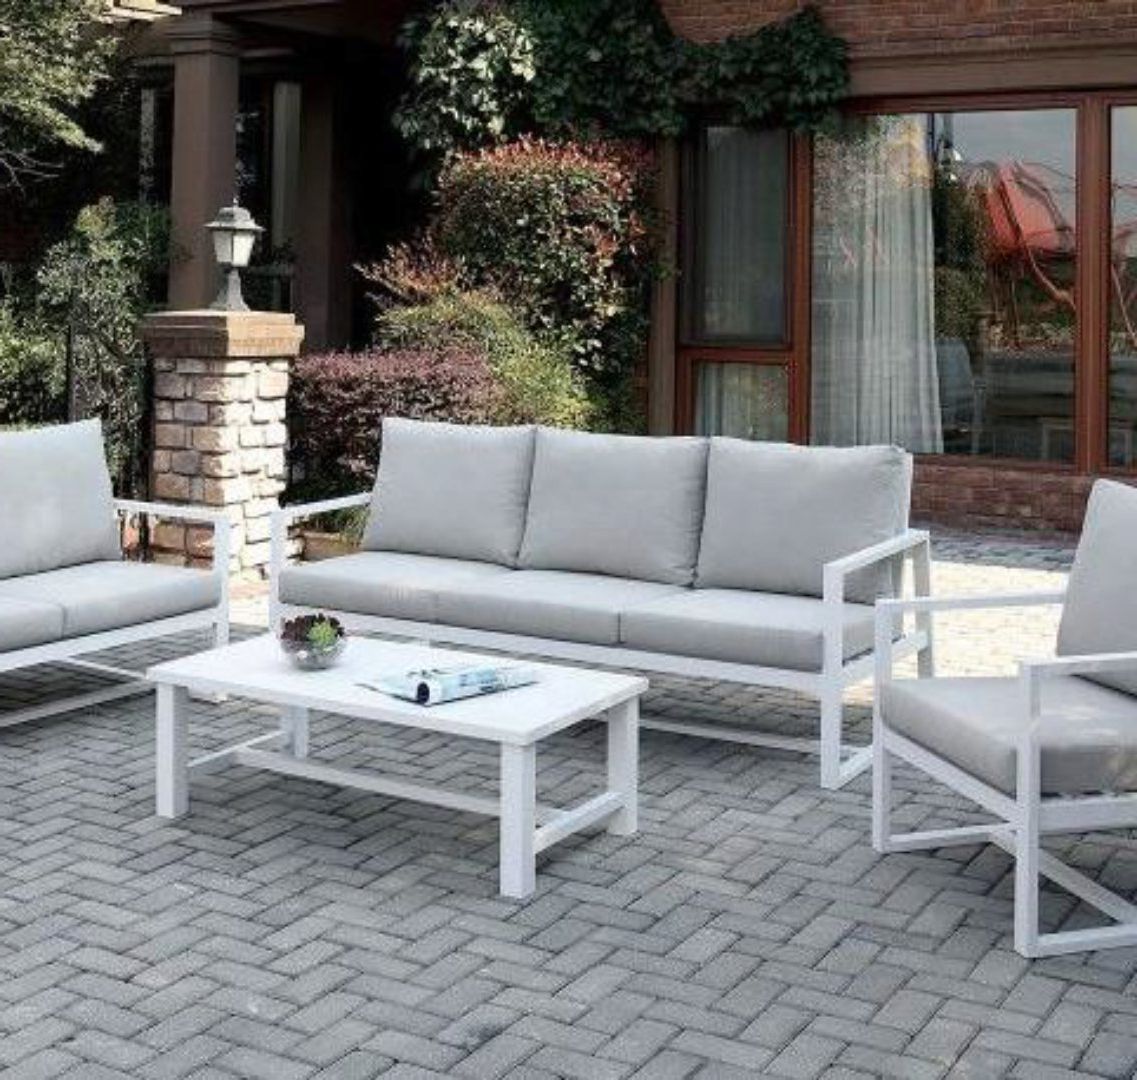 Aluminum Frame Construction Beige Fabric Patio Sofa Set Regarding Newest Ecru And Otter Coffee Tables (View 4 of 20)